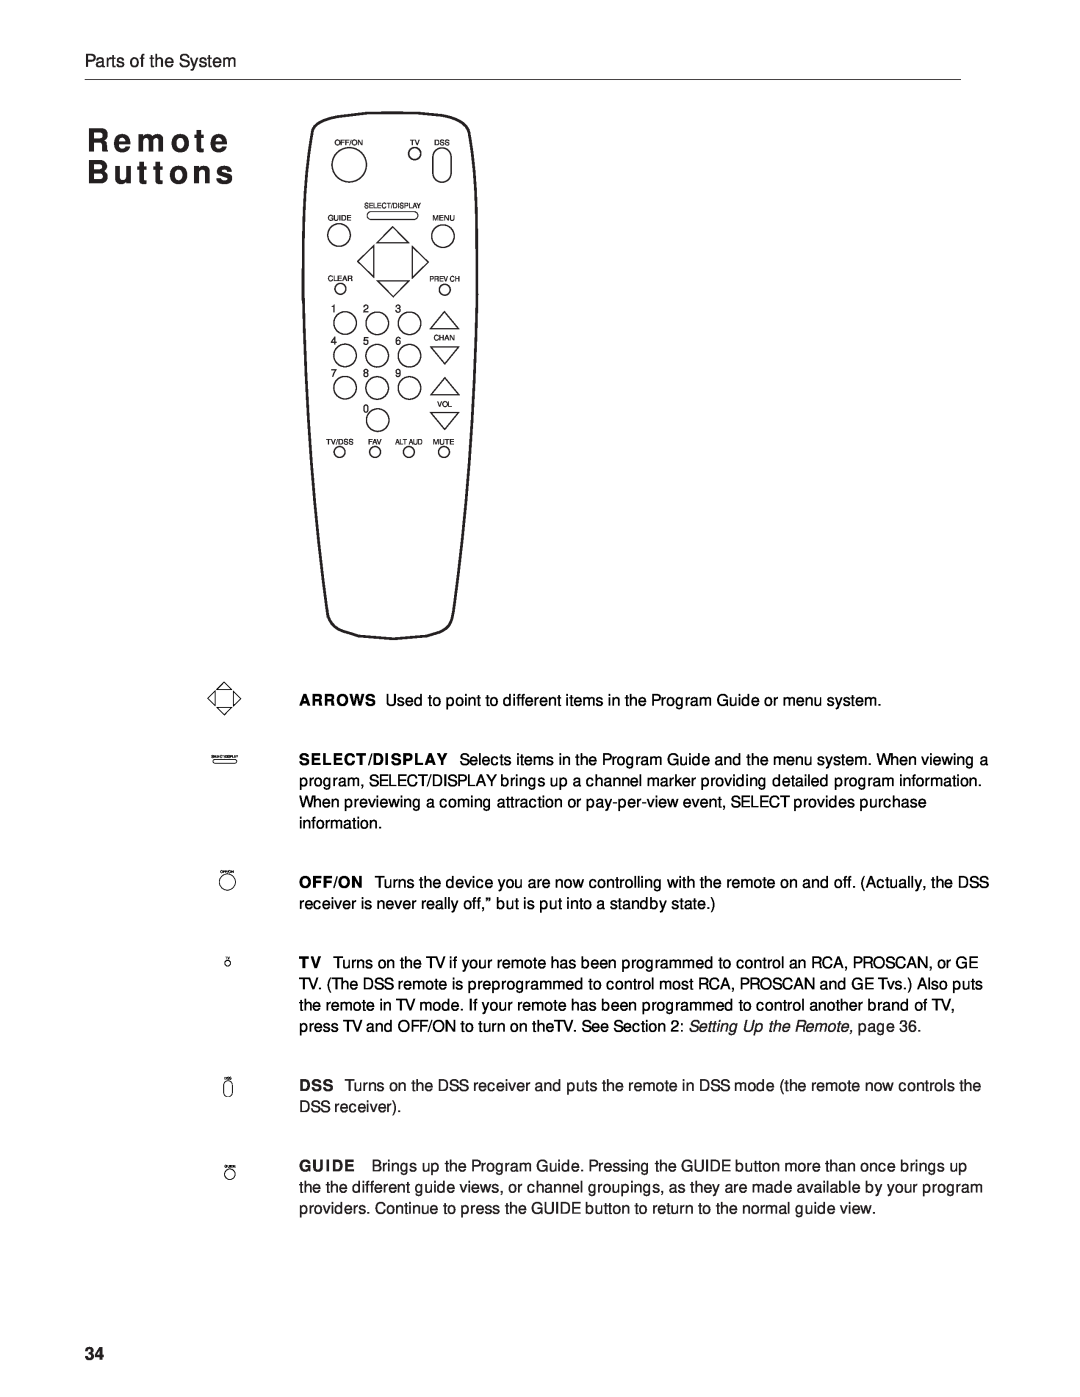 RCA DRD212NW user manual Remote Buttons, Parts of the System 